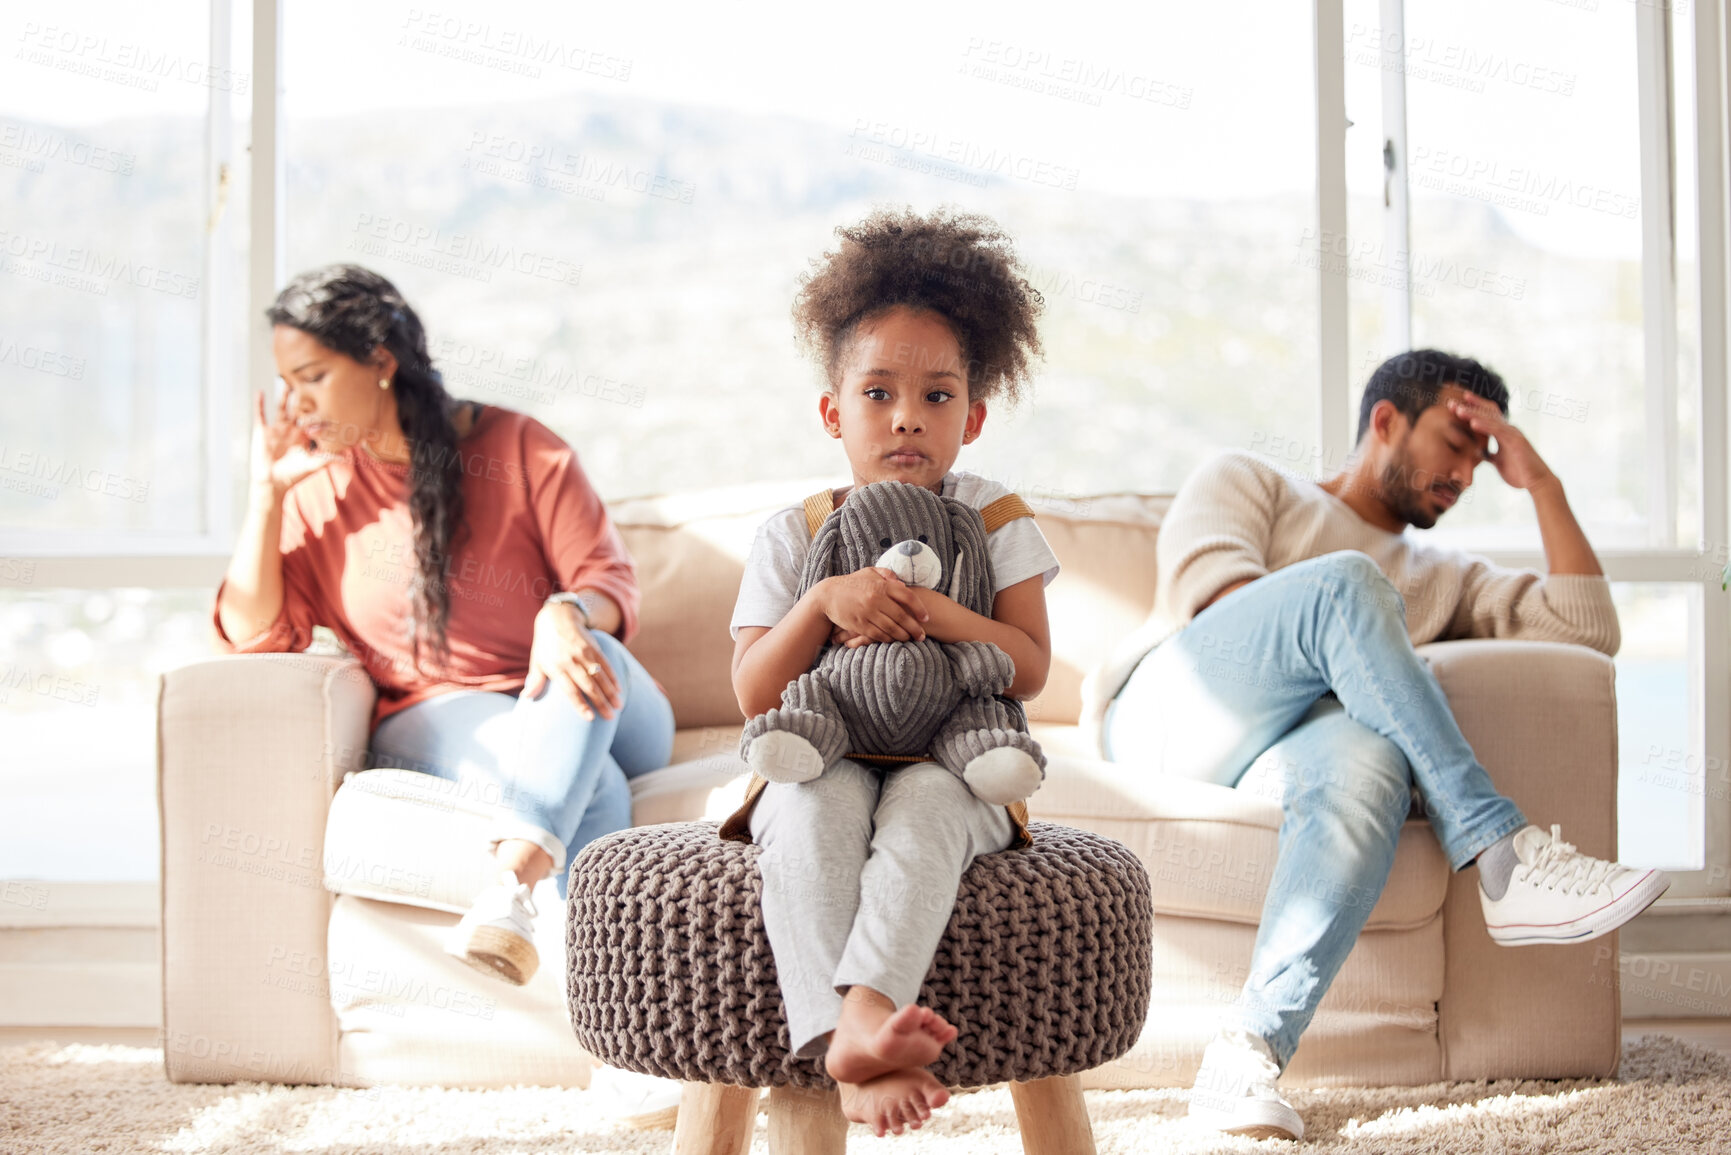 Buy stock photo Scared little kid with afro sitting and holding teddy bear while parents fight. African American couple ignoring each other after arguing in presence of their daughter. Parents divorce affecting child